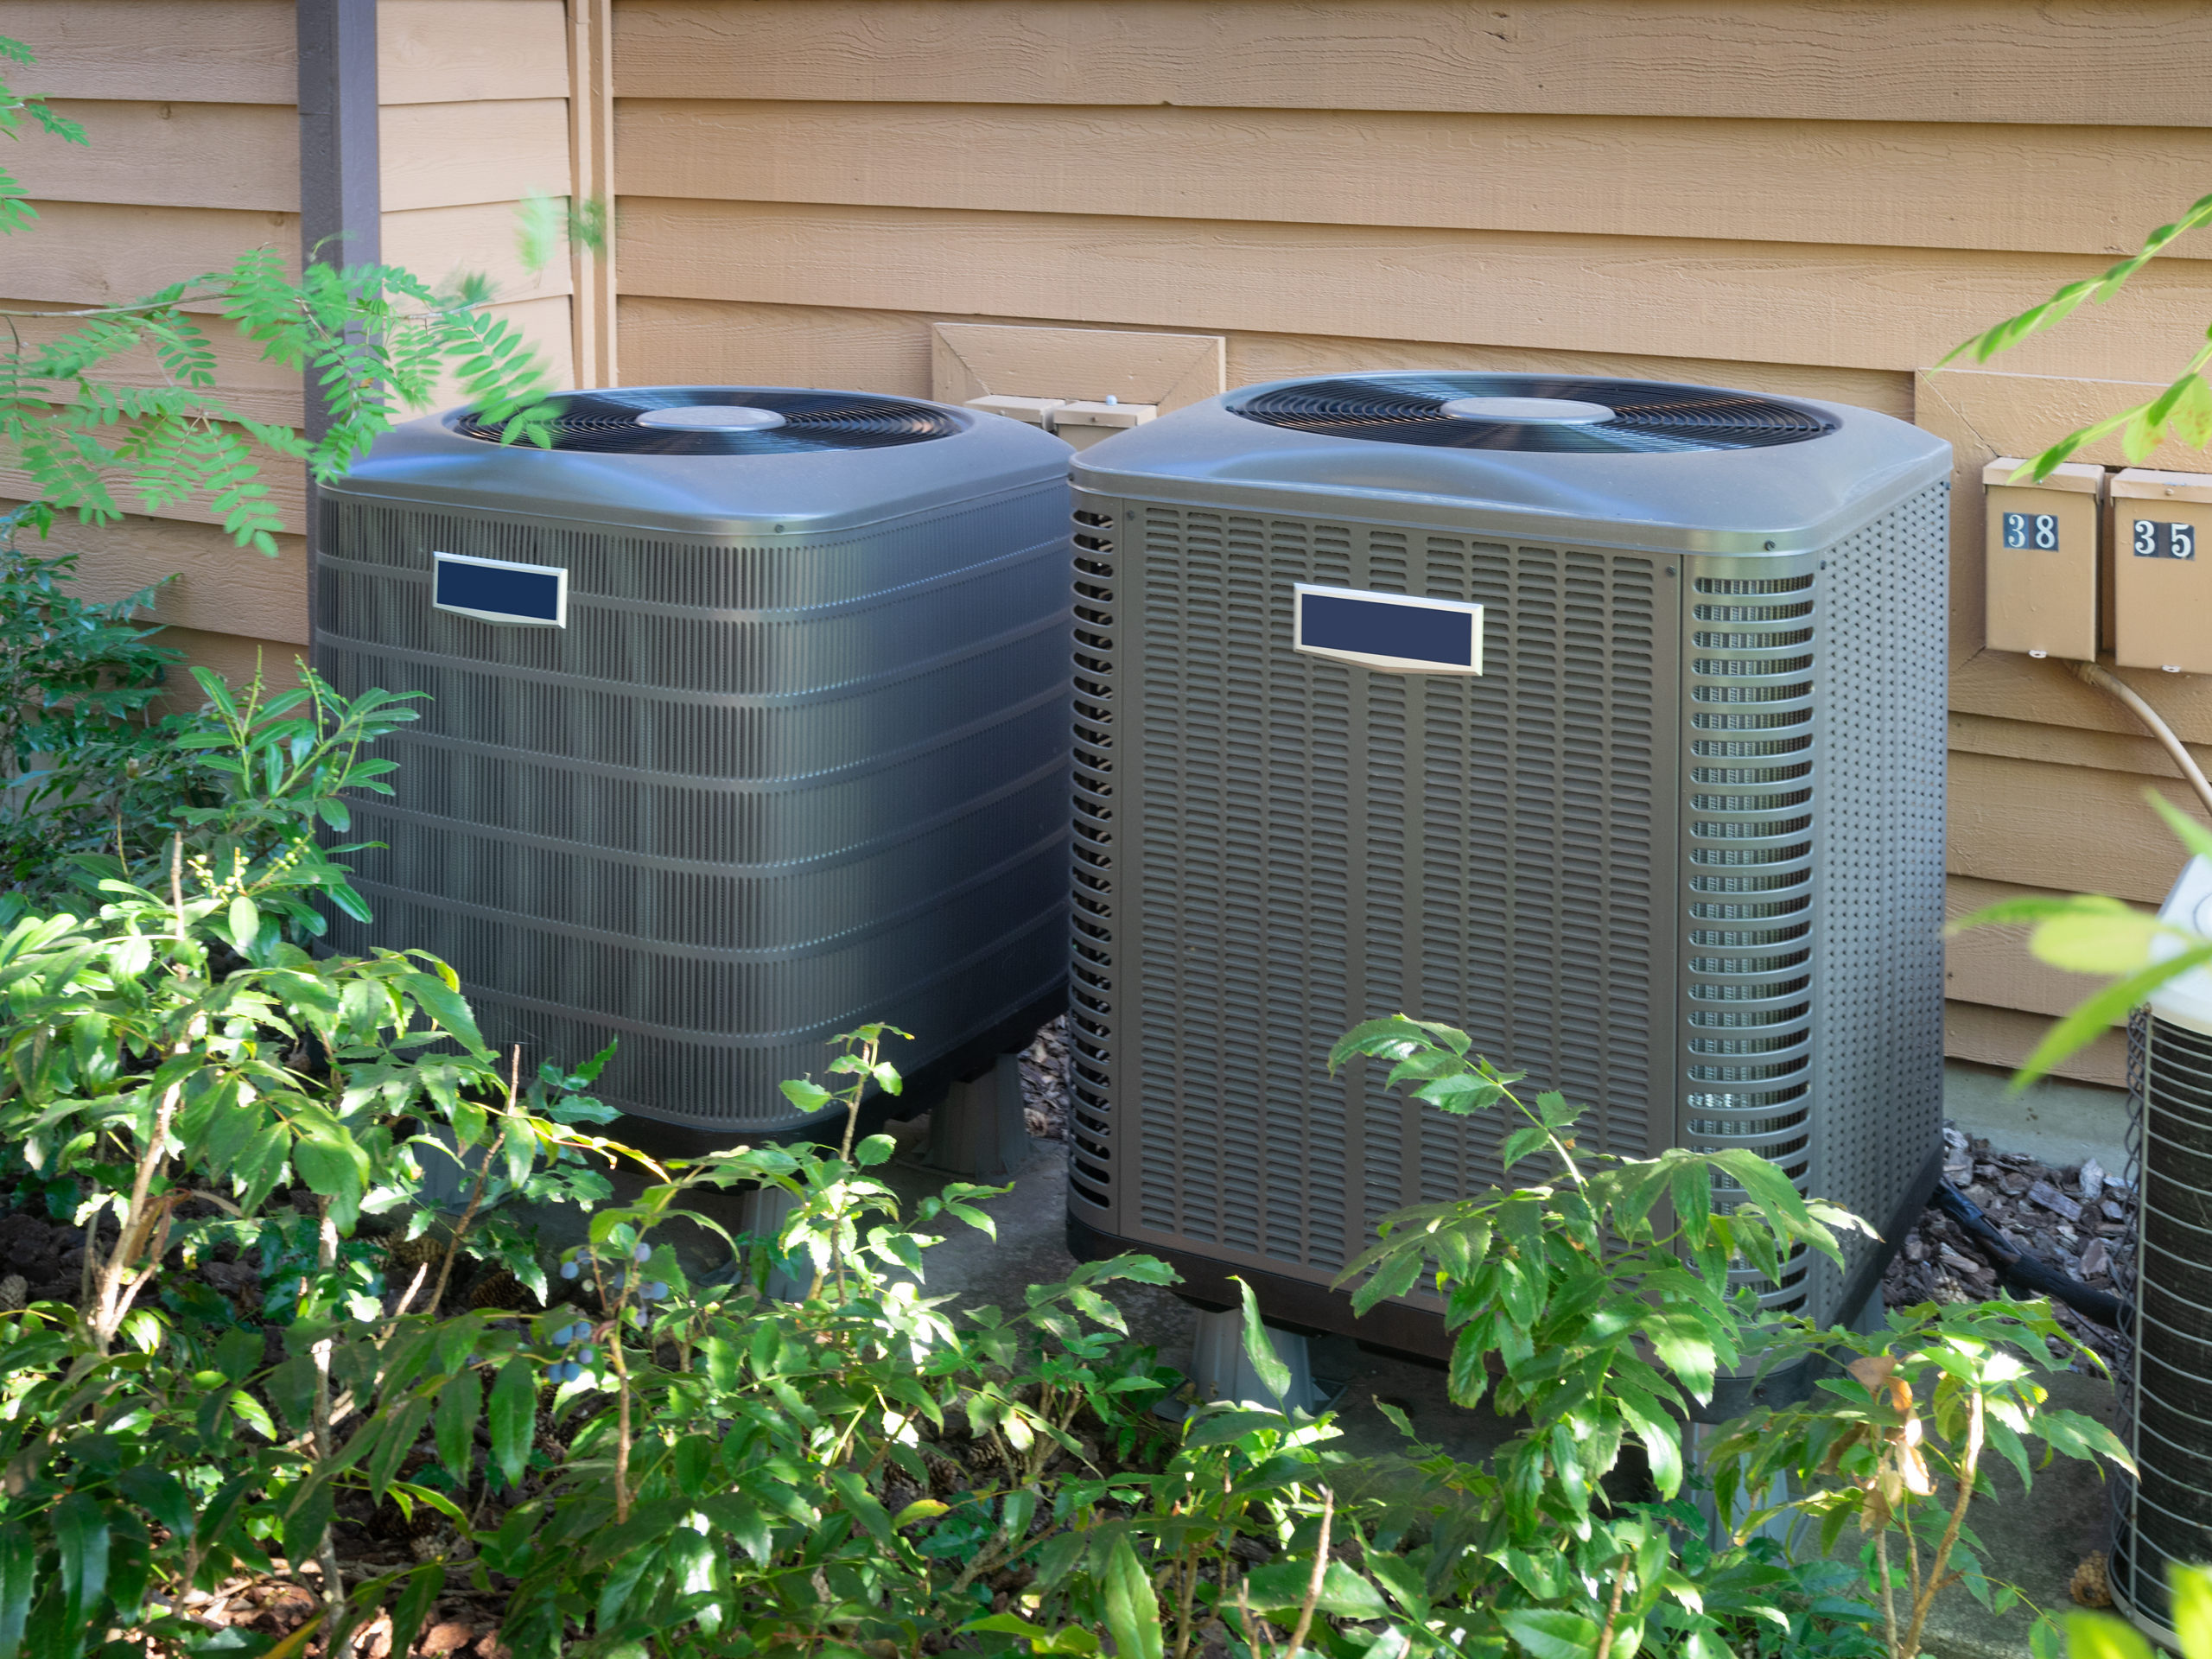 Air conditioning units outside a home.